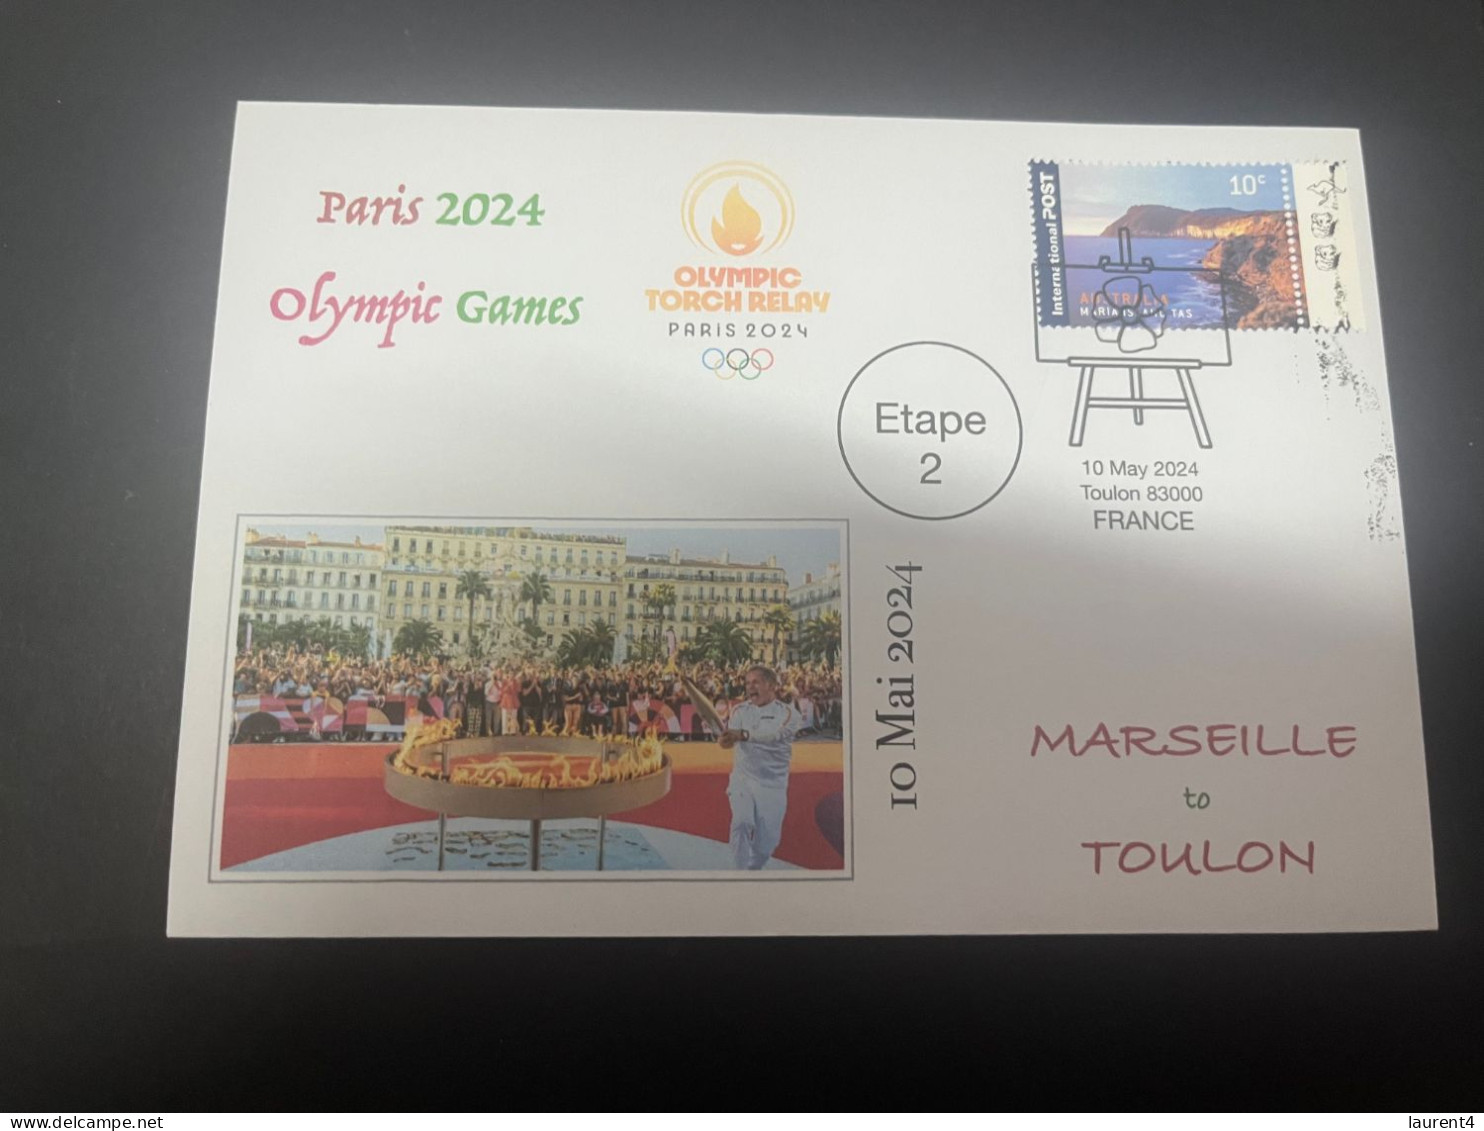 11-5-2024 (4 Z 42) Paris Olympic Games 2024 - Torch Relay (Etape 2) In Toulon (10-5-2024) With OZ Stamp - Sommer 2024: Paris